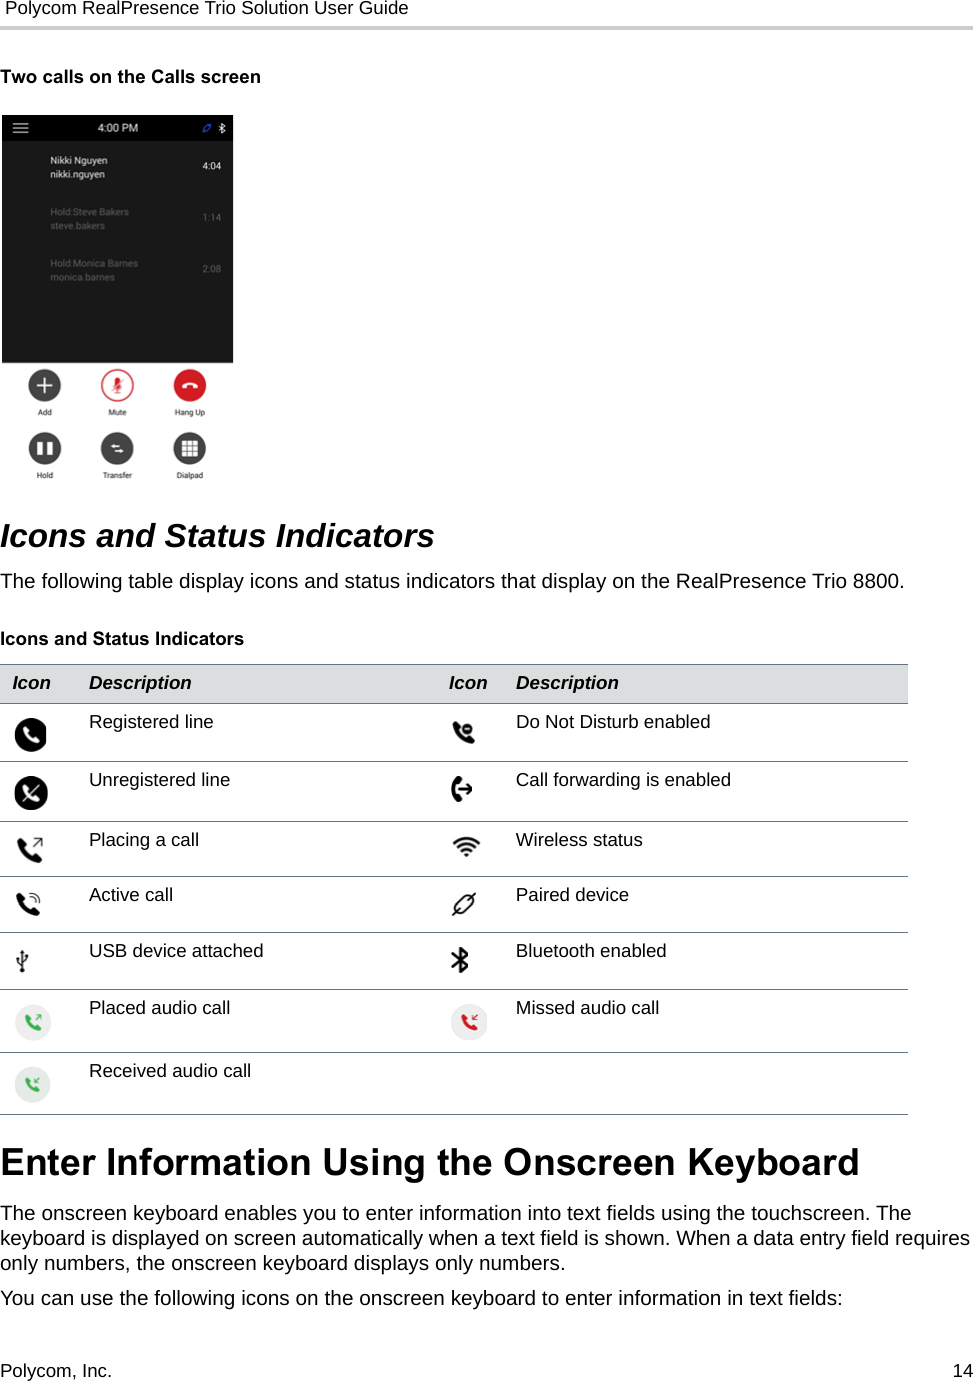  Polycom RealPresence Trio Solution User GuidePolycom, Inc.  14   Two calls on the Calls screenIcons and Status IndicatorsThe following table display icons and status indicators that display on the RealPresence Trio 8800.Enter Information Using the Onscreen KeyboardThe onscreen keyboard enables you to enter information into text fields using the touchscreen. The keyboard is displayed on screen automatically when a text field is shown. When a data entry field requires only numbers, the onscreen keyboard displays only numbers.You can use the following icons on the onscreen keyboard to enter information in text fields: Icons and Status IndicatorsIcon Description Icon DescriptionRegistered line Do Not Disturb enabledUnregistered line Call forwarding is enabledPlacing a call Wireless statusActive call Paired deviceUSB device attached Bluetooth enabledPlaced audio call Missed audio callReceived audio call